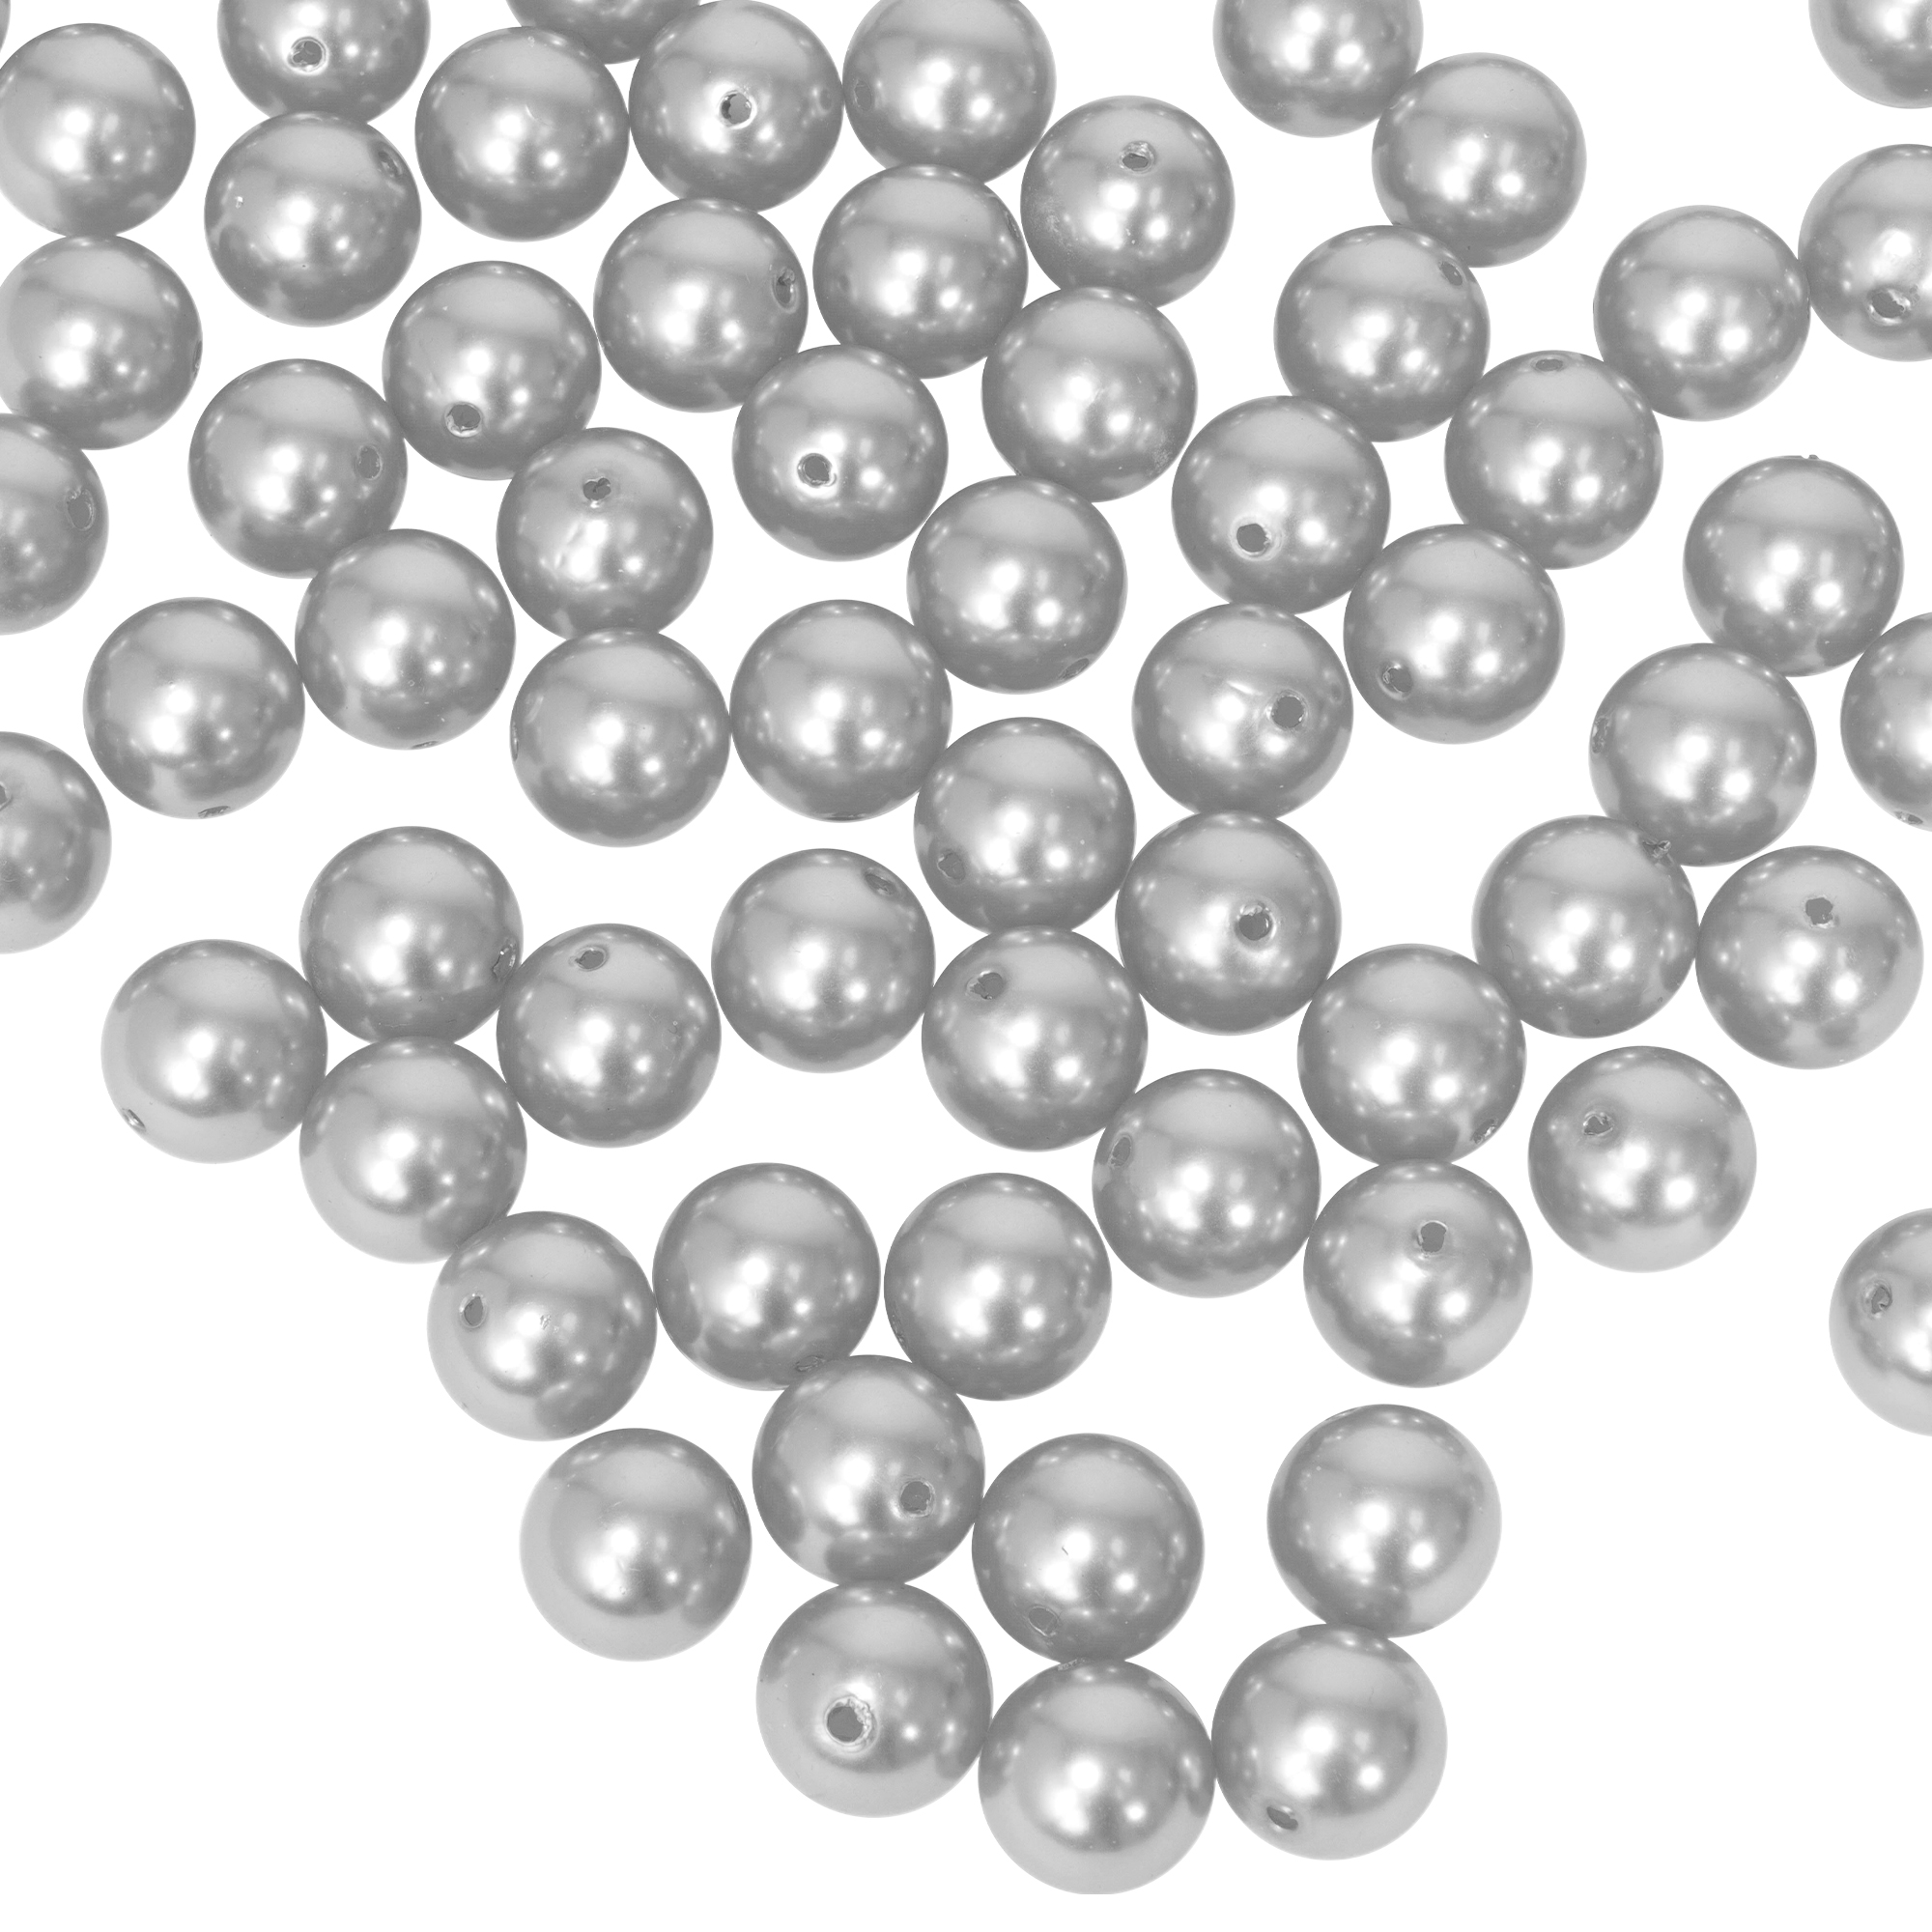 20mm Craft Pearl Beads With Hole 454g/Bag - Silver